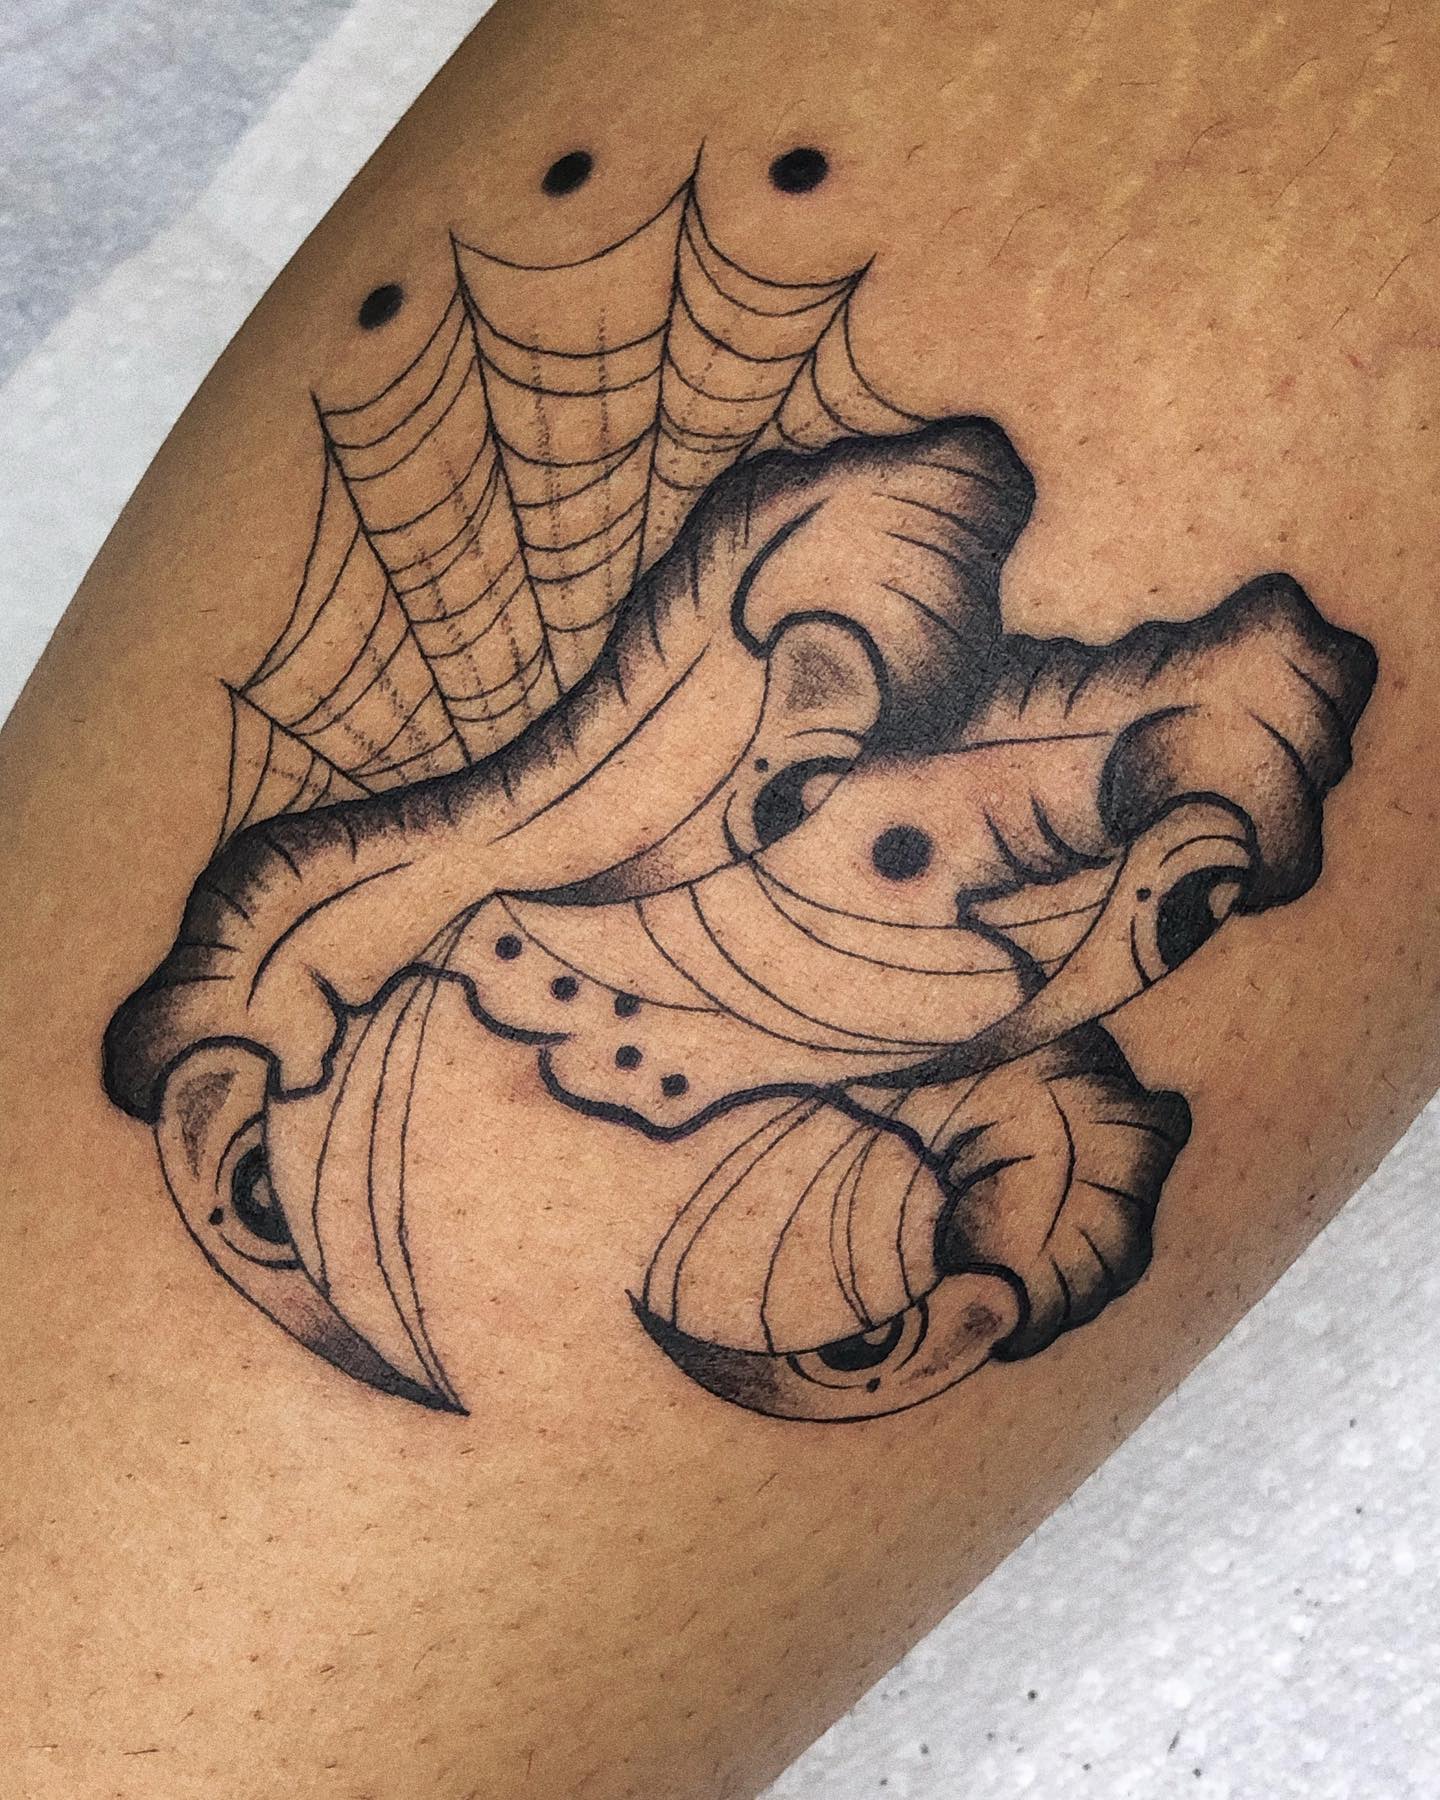 If you’ve been dealing with an obstacle of any kind in your lifetime this tattoo will suit you. Show that you’ve surpassed your fears and “stick” to this web design.